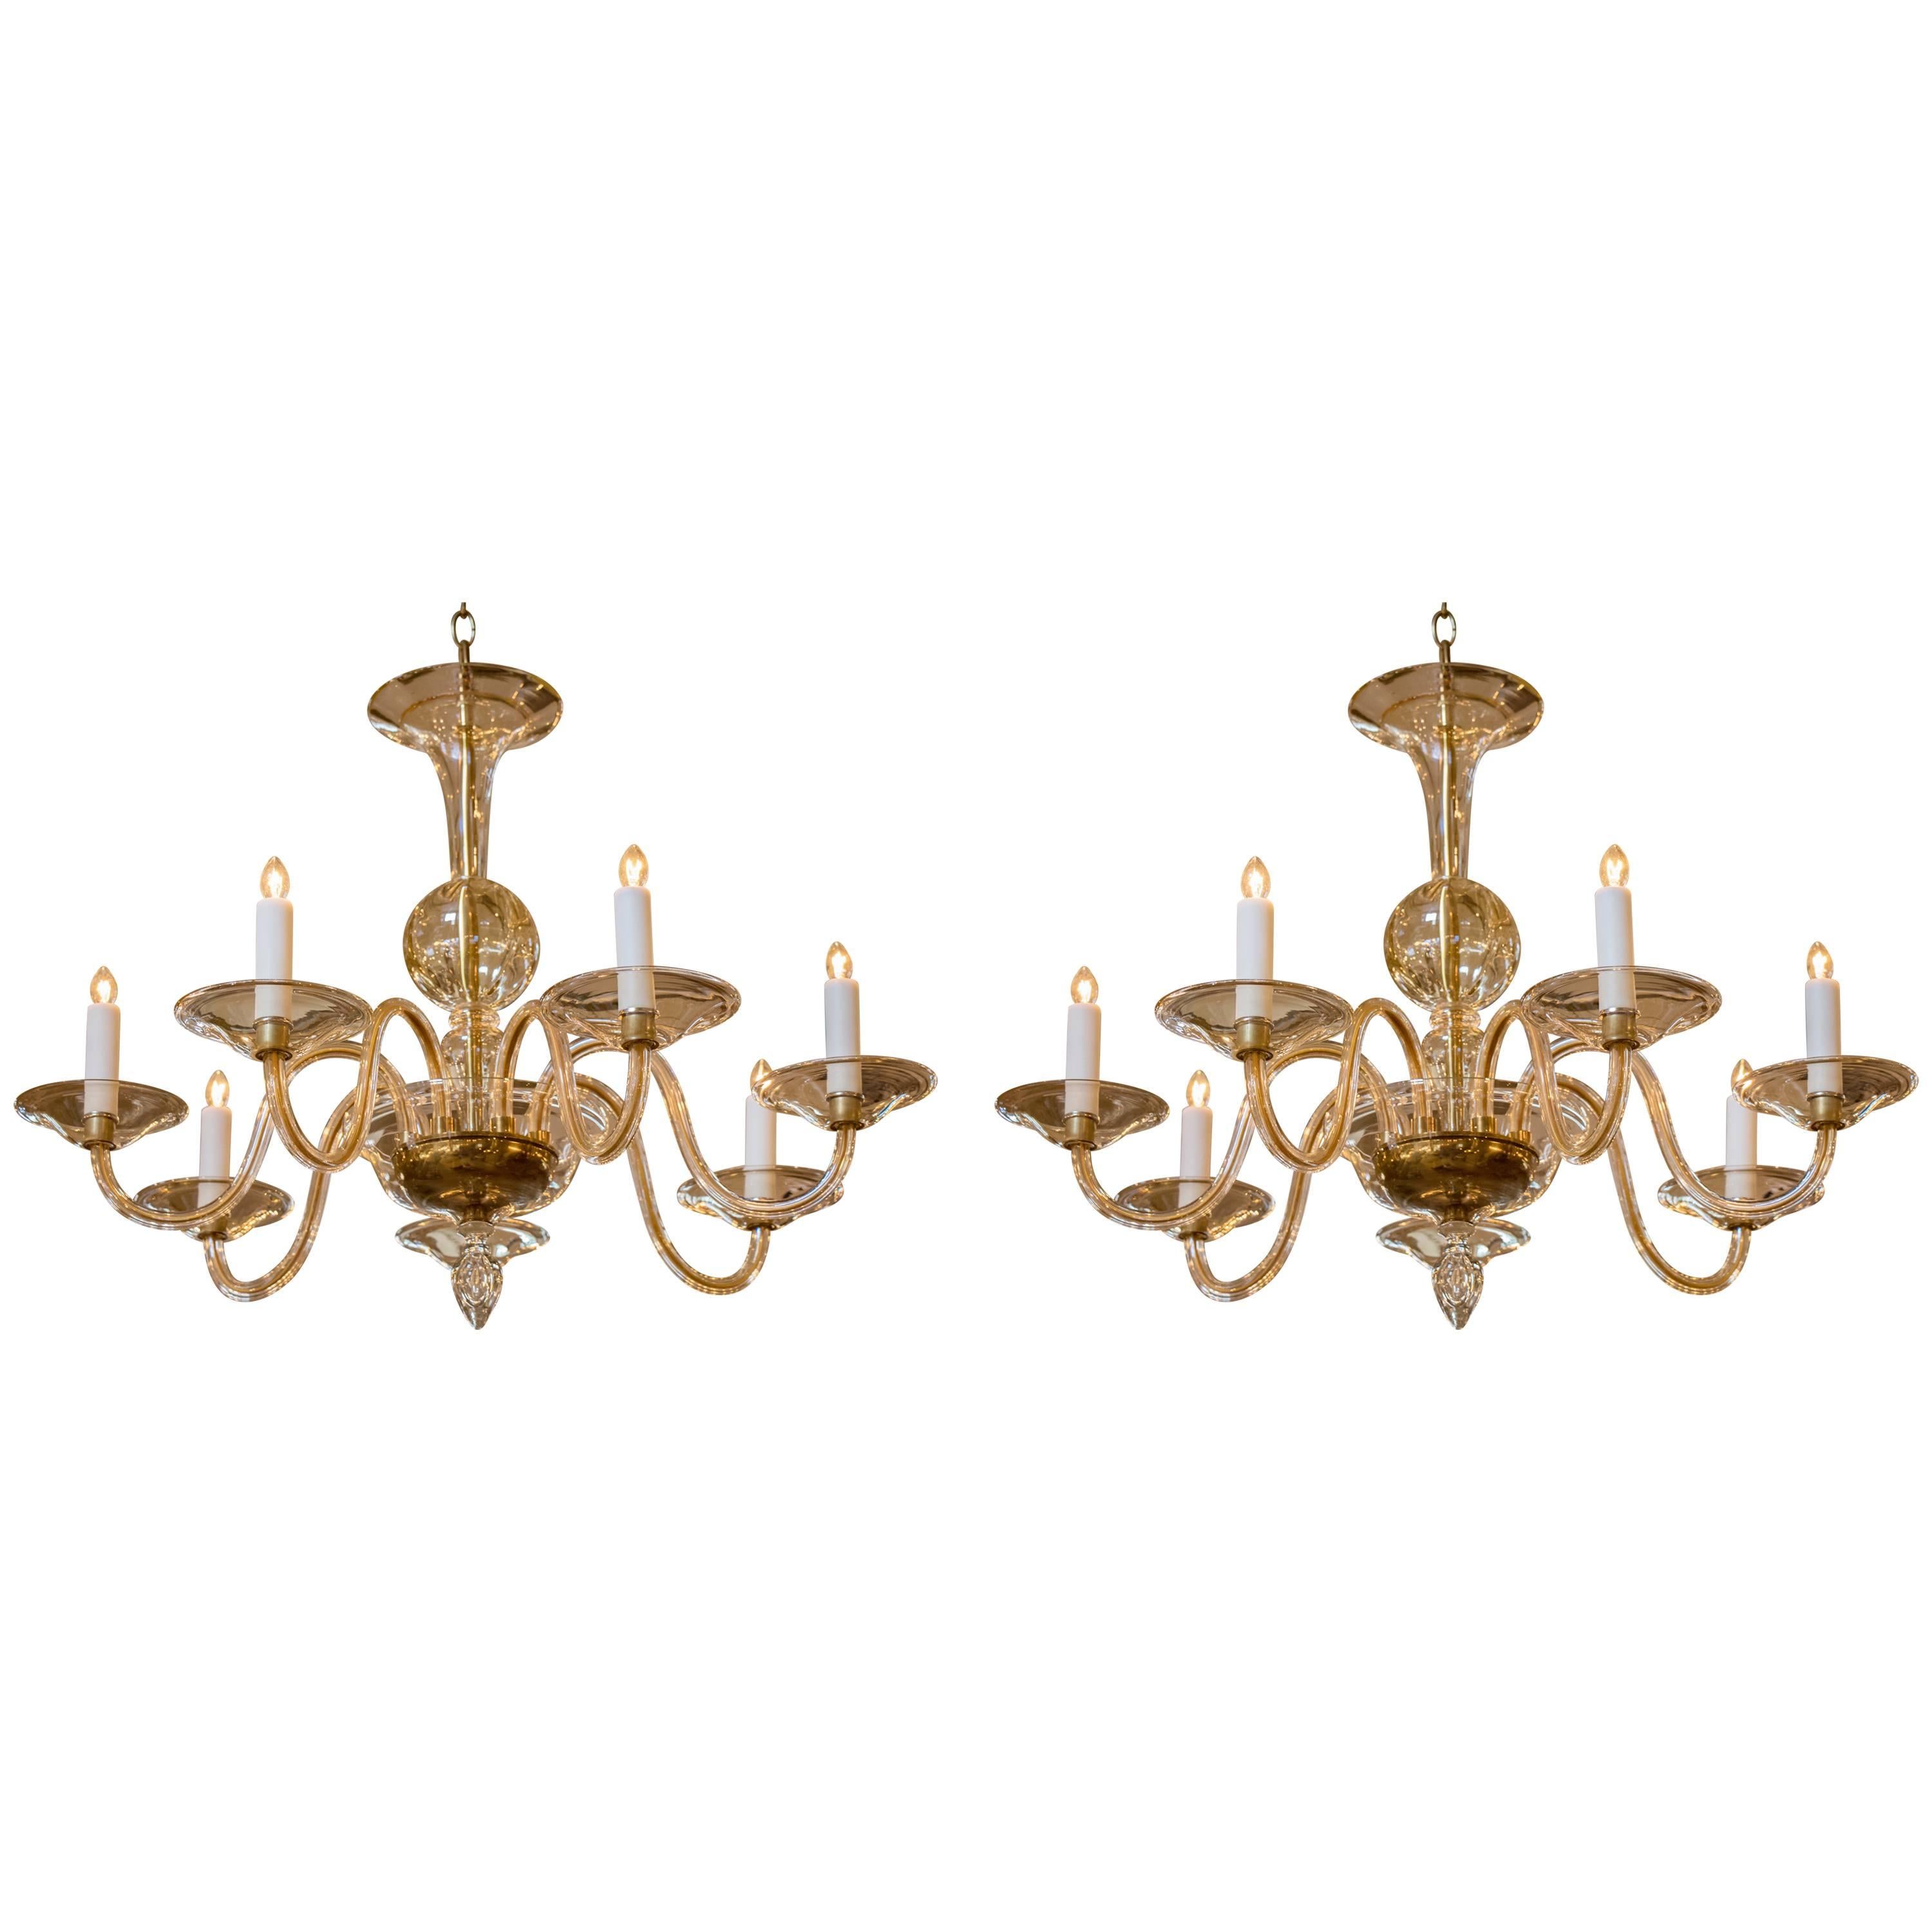 Pair Hand-Blown Italian Murano Glass Chandeliers in the "Moderne" Style